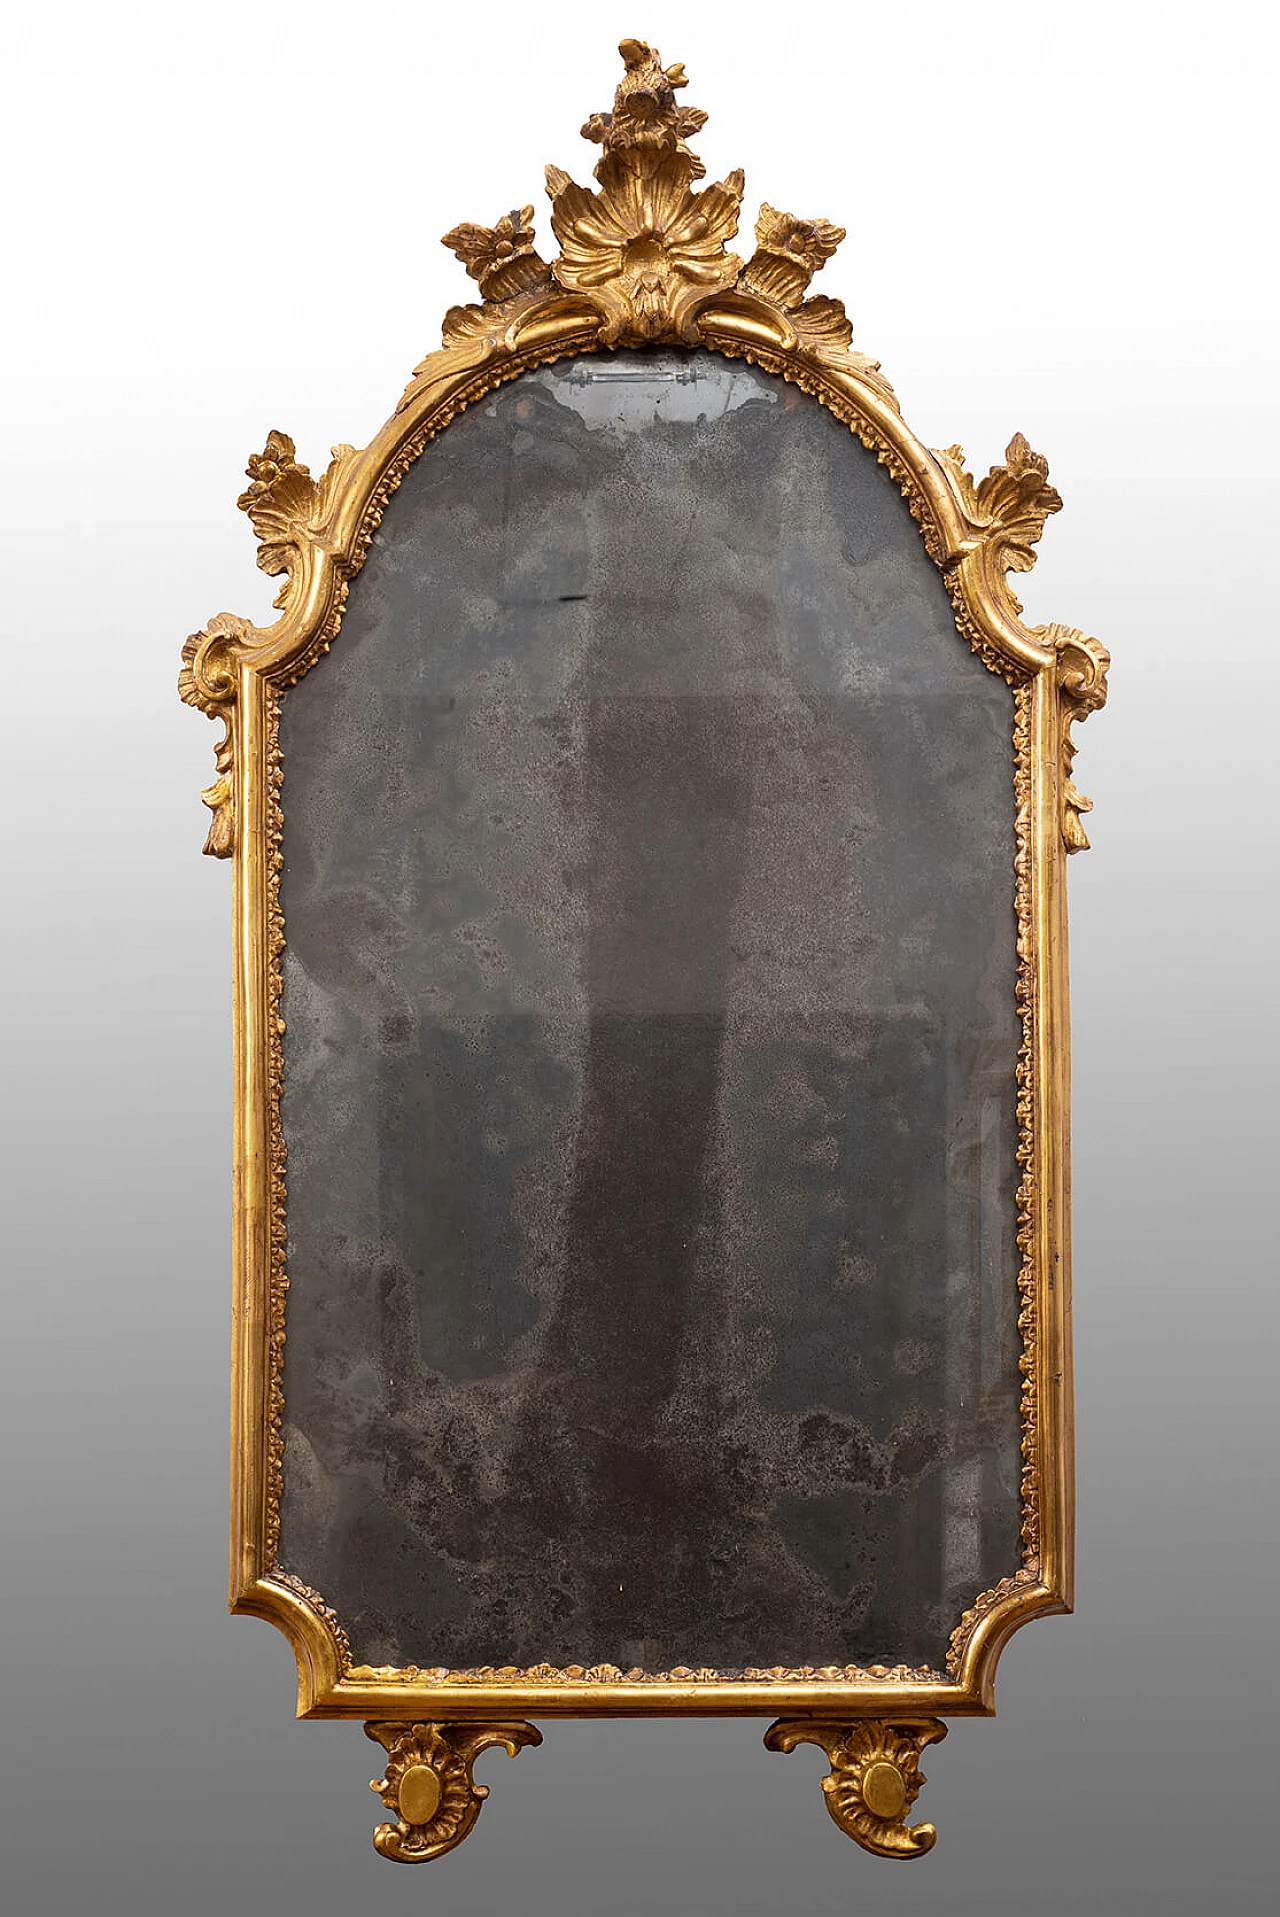 Neapolitan Louis XV mirror in gilded and carved wood, 18th century 1370144